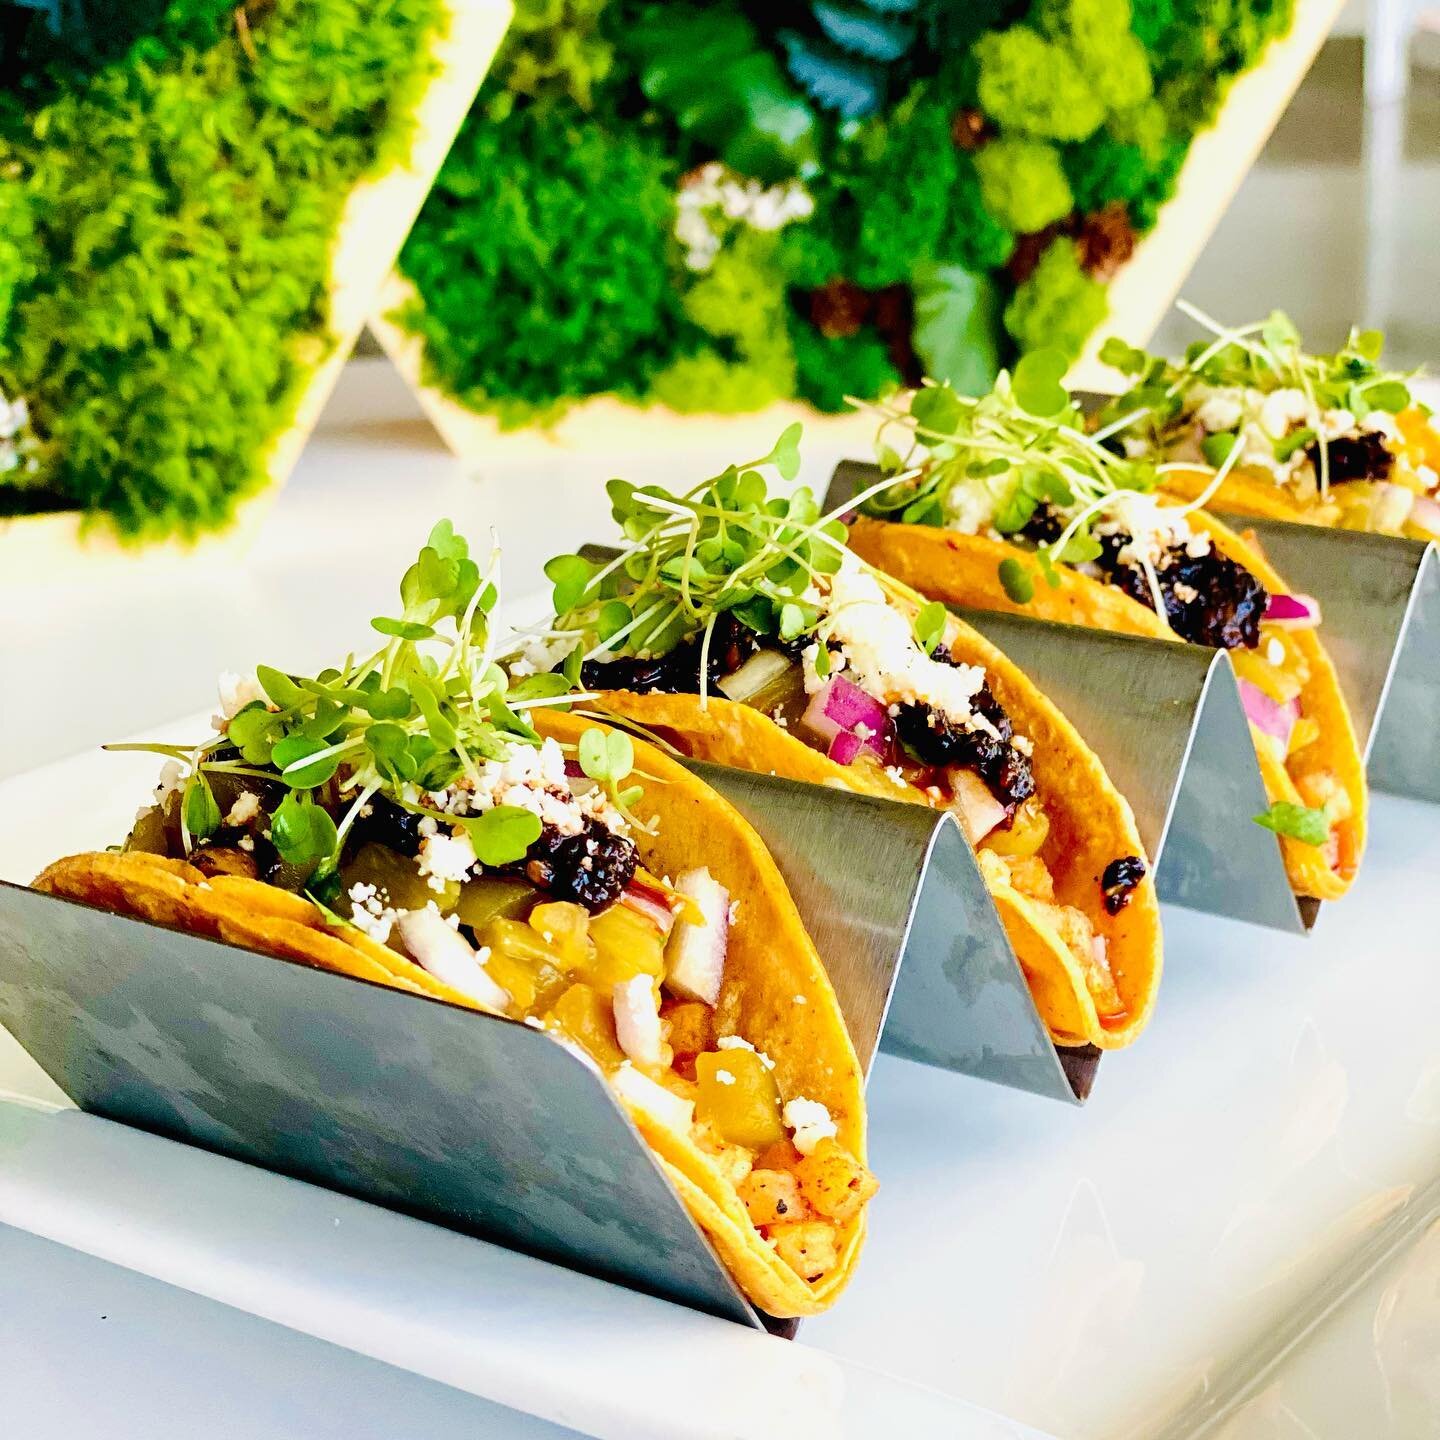 There&rsquo;s nothing clich&eacute; about grabbing our Spicy Yukon Gold Potato Tacos with roasted poblano peppers, onions and cotija cheese from The Green House at a Tuesday event at Chase Center. Just sayin&rsquo; 😏🌮

#tacotuesday #spicy #tacos #t